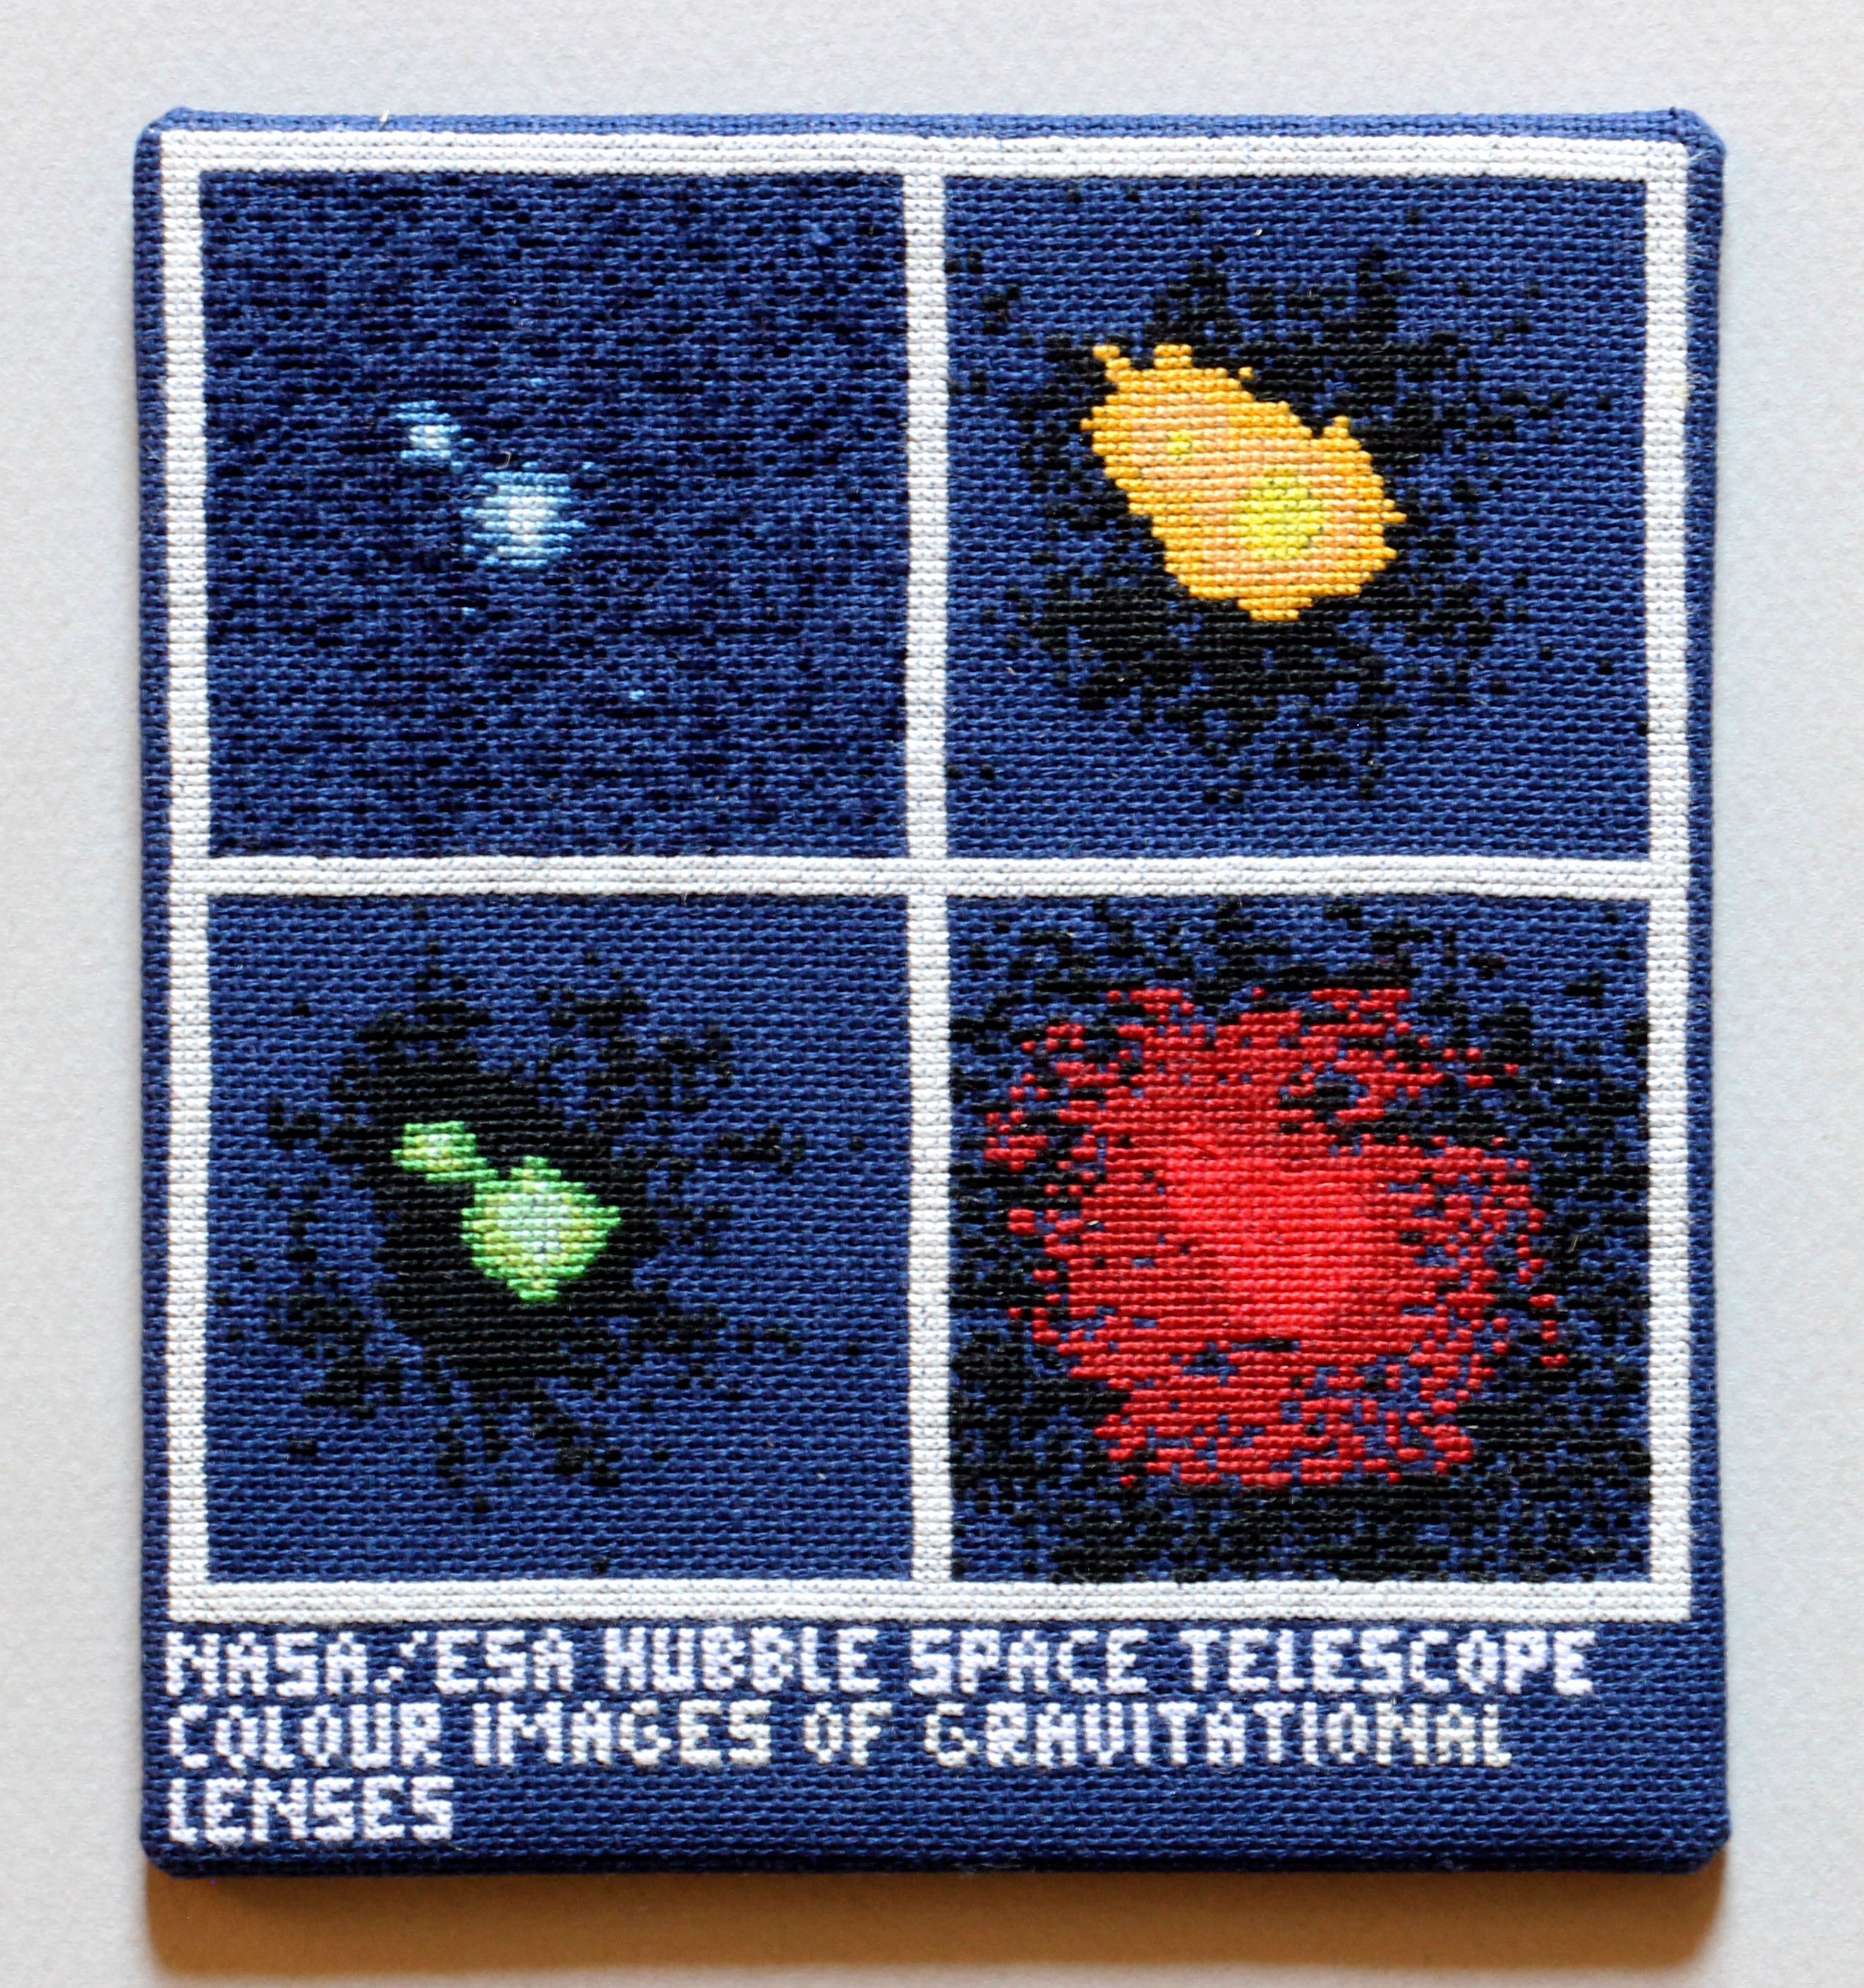  / Cross-stitch embroidery of a distant quasar, inspired by an Hubble shot. Art by artist Marine Beaufils.